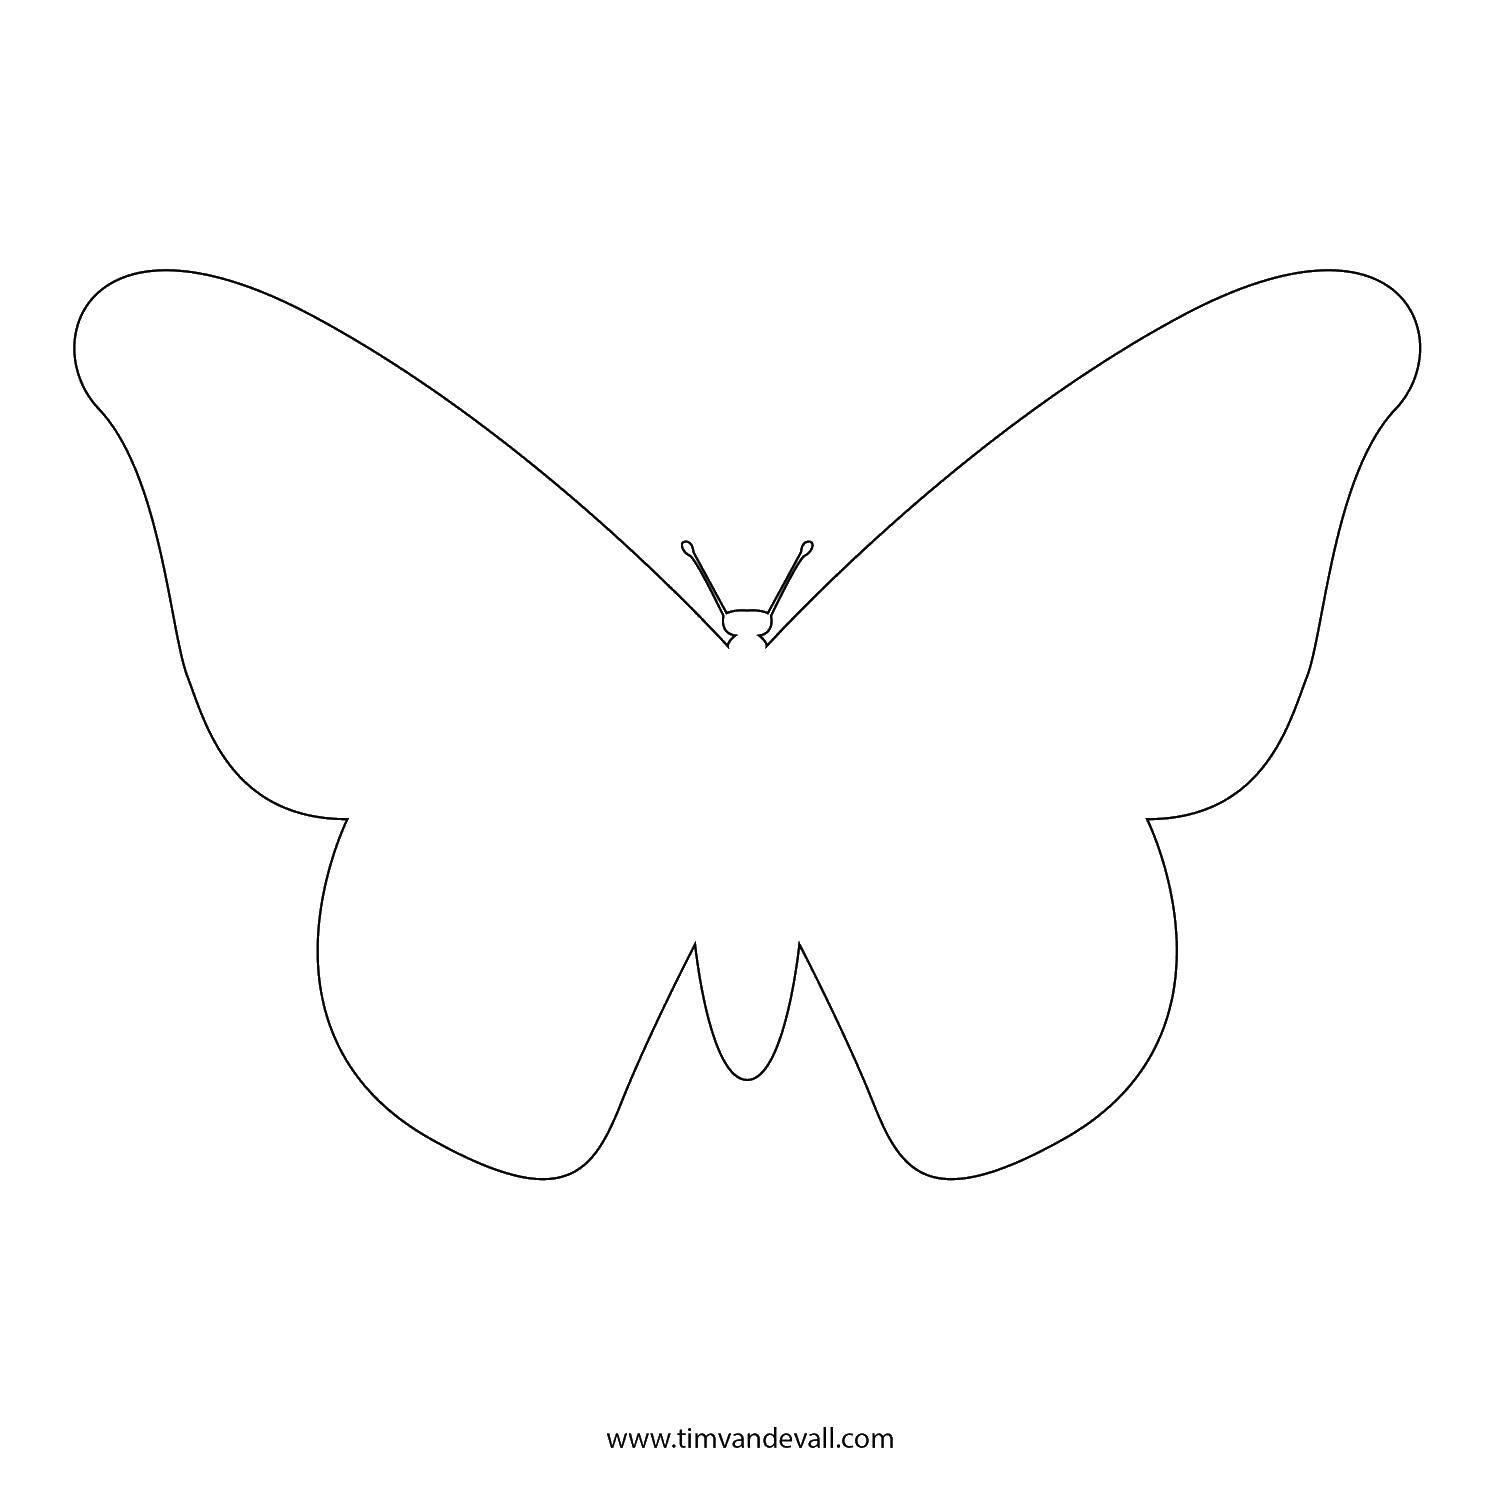 Coloring Butterfly outline. Category the contours of the butterflies to cut. Tags:  the contours, butterflies.